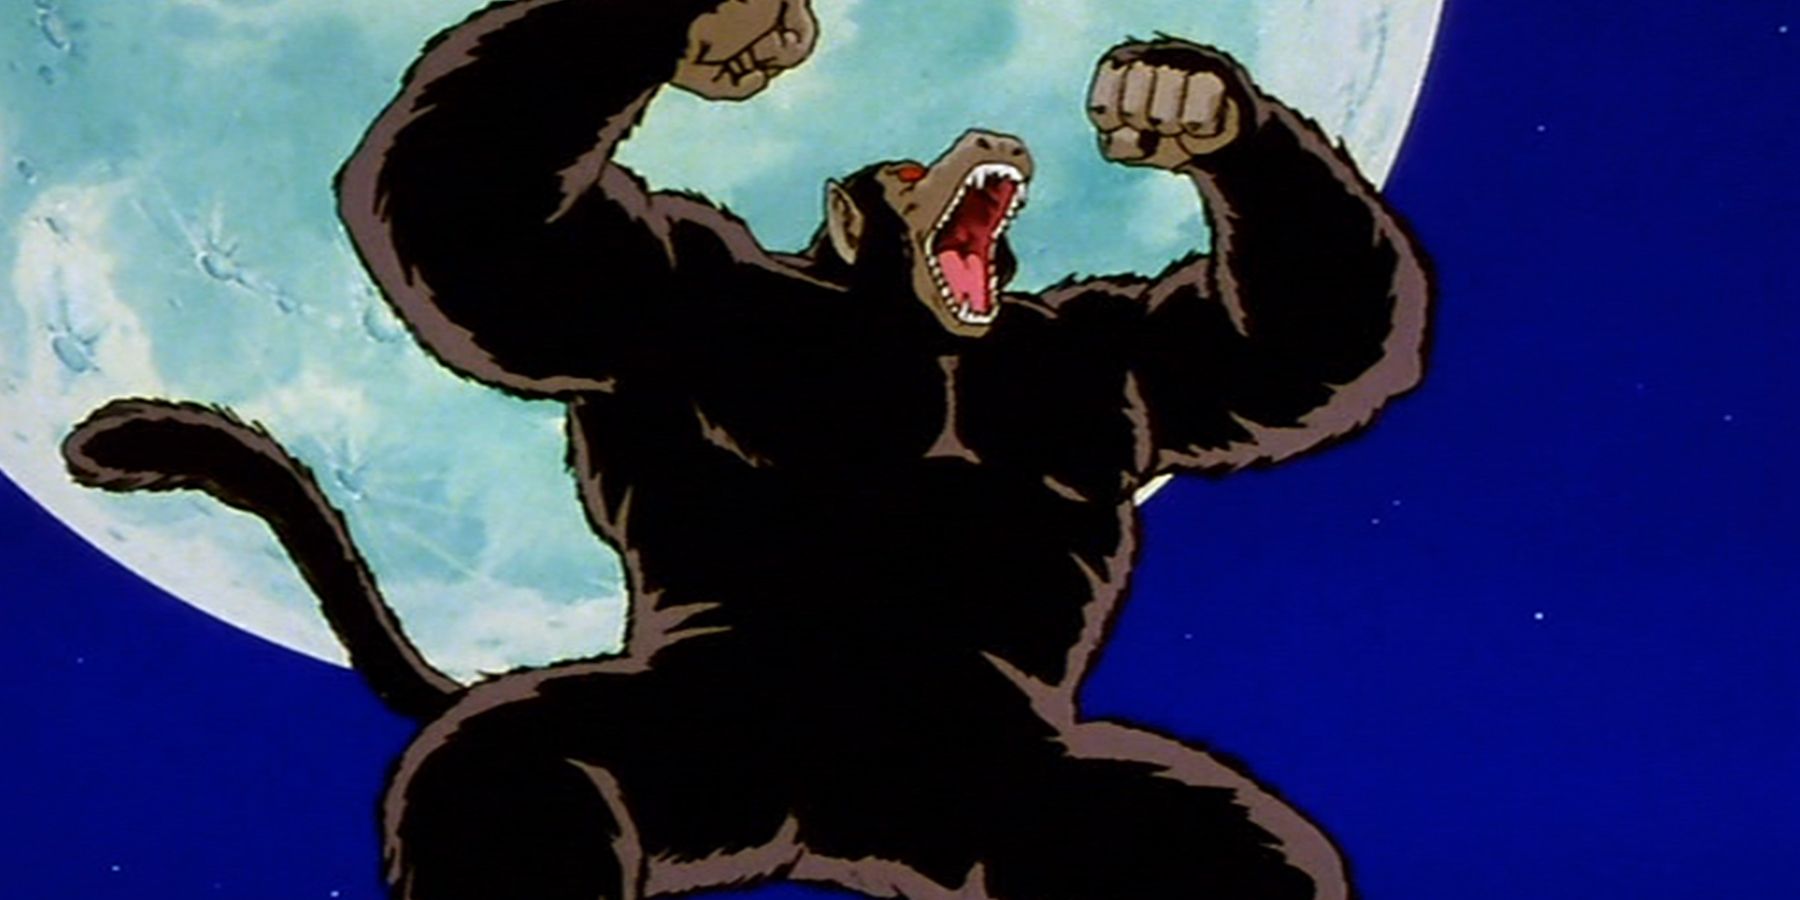 Gohan's Great Ape form roaring in front of the full moon in Dragon Ball Z